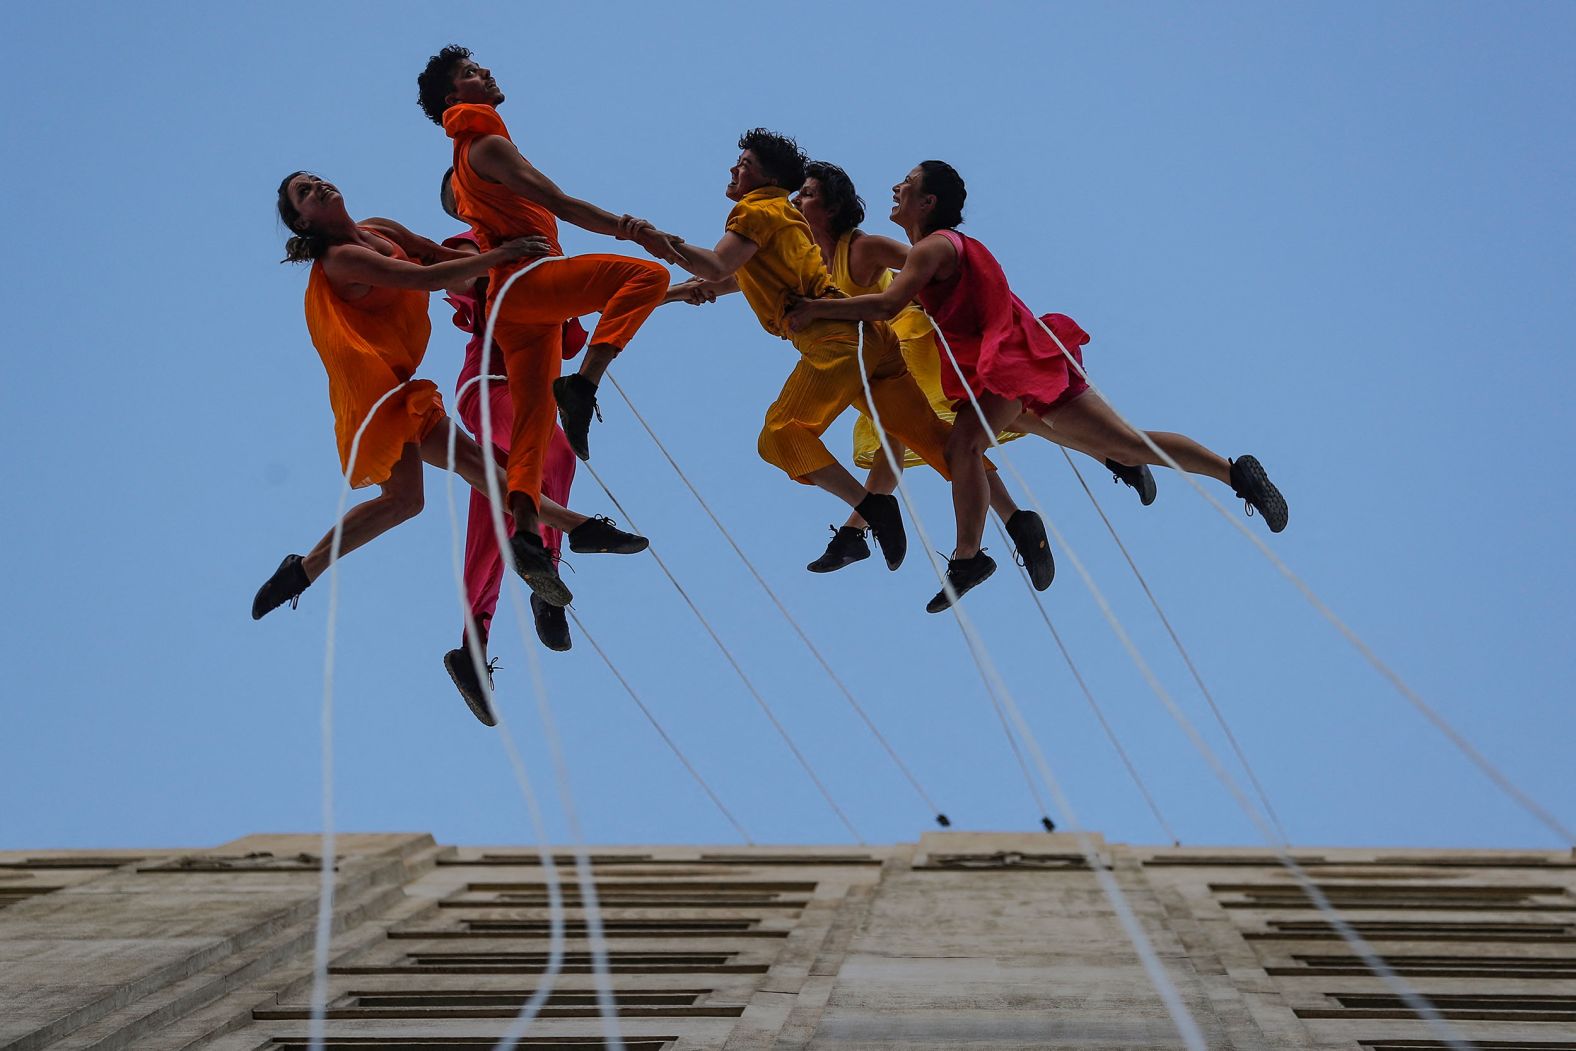 Dancers from the US company Bandaloop perform their show "Bird Sky" during the Teatro a Mil international performing arts festival in Santiago, Chile, on Friday, January 13.